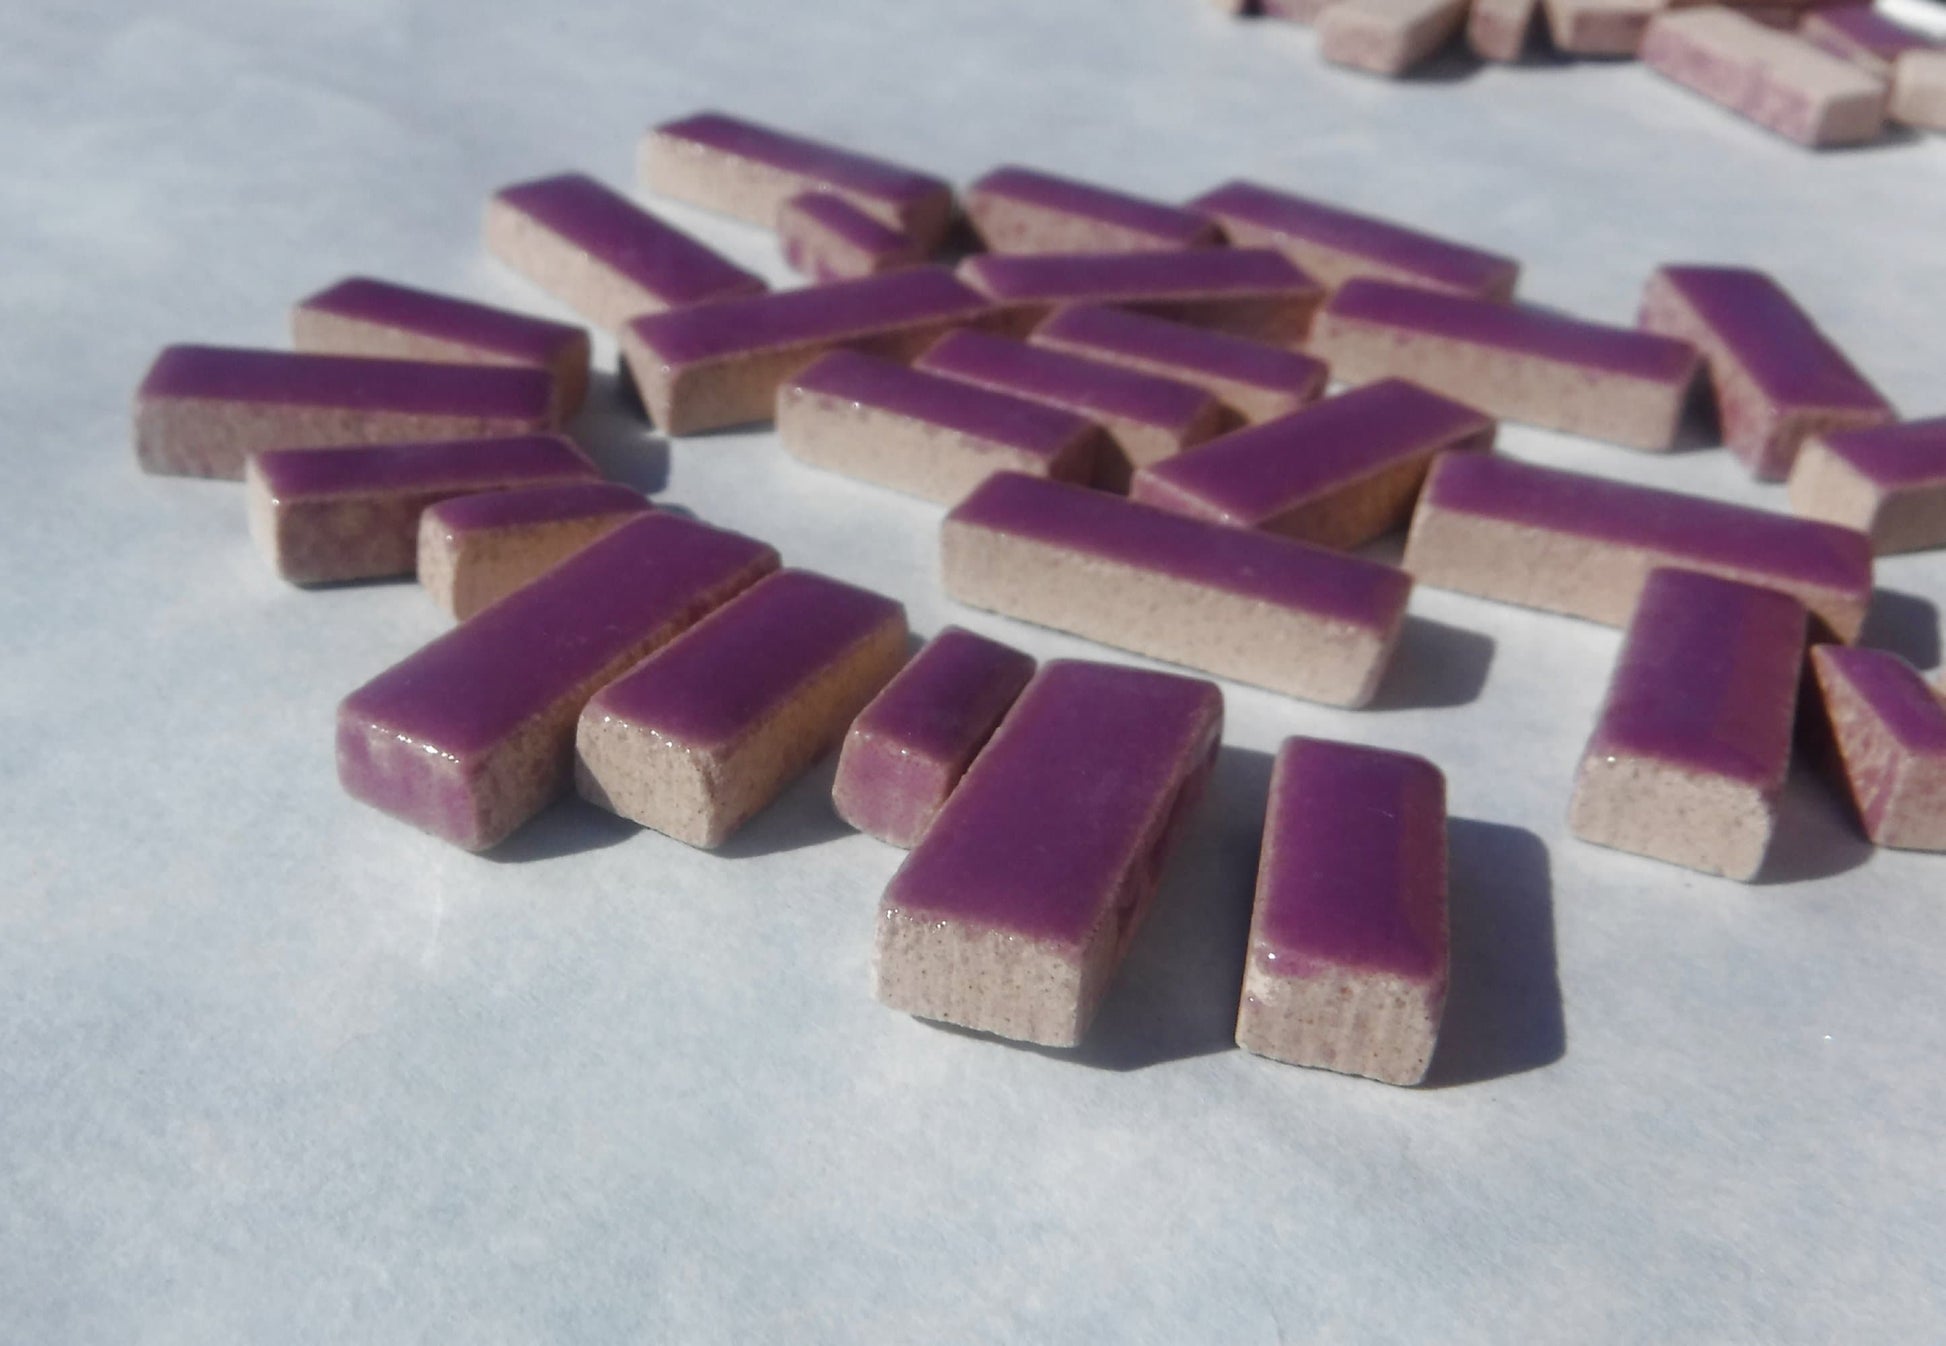 Purple Mini Rectangles Mosaic Tiles - 50g Ceramic in Mix of 3 Sizes 1/2" and 3/4"